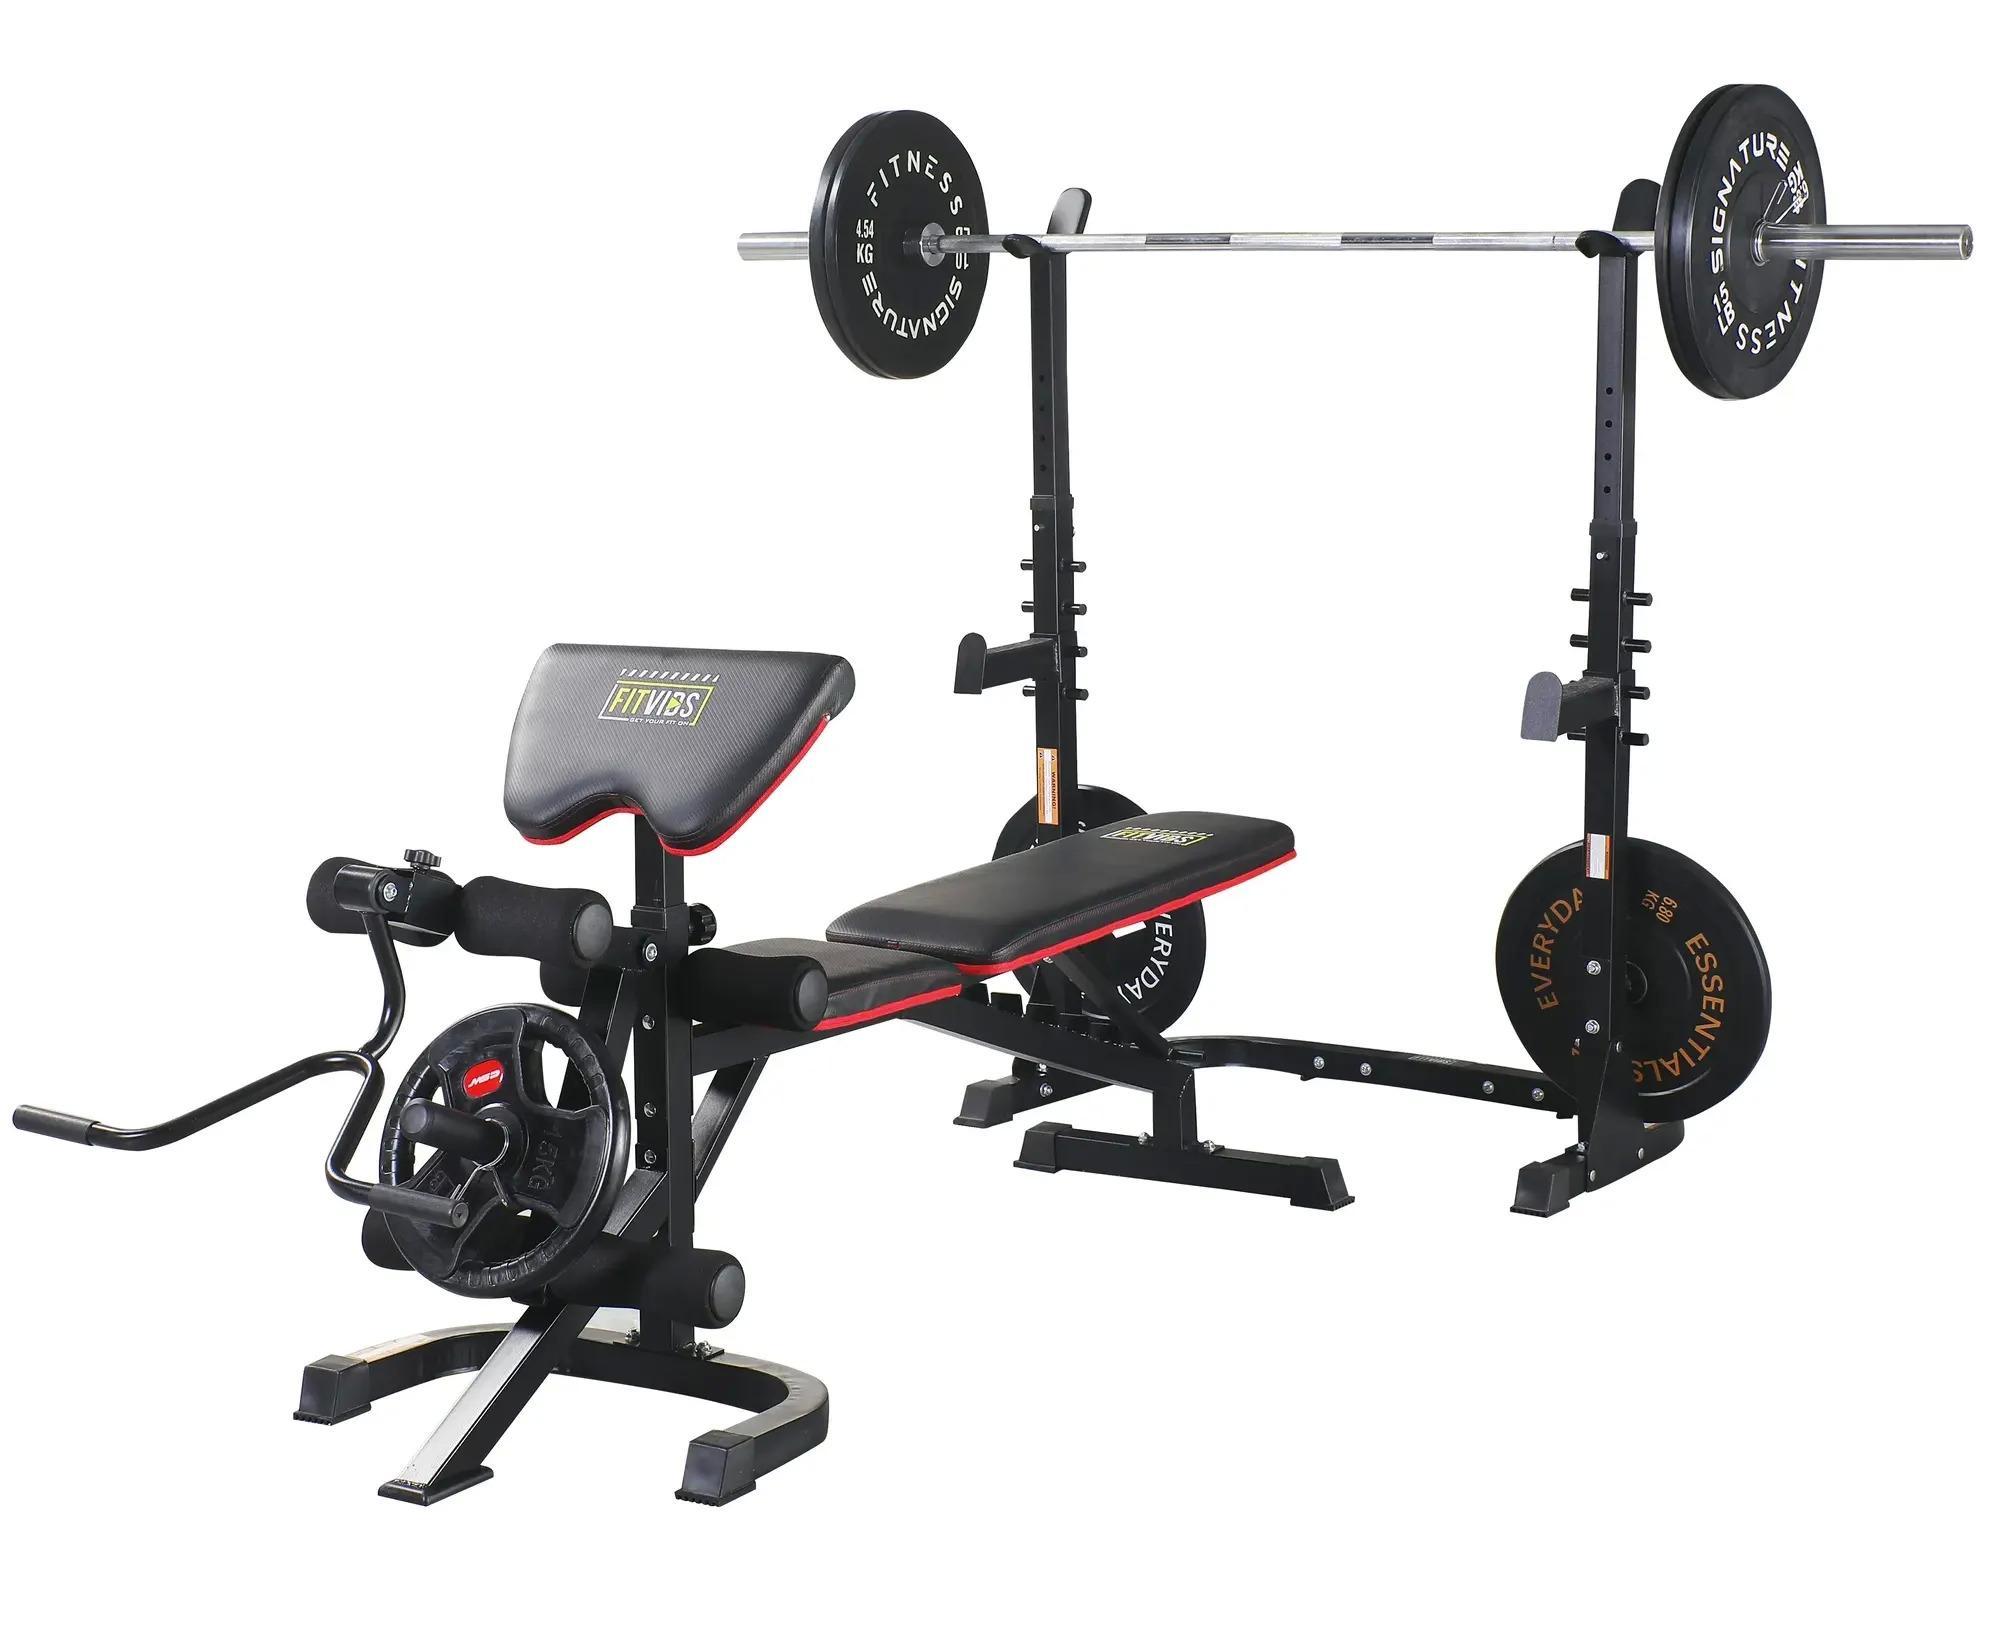 Fitvids LX600 Adjustable Olympic Workout Bench with Squat Rack for $129.99 Shipped